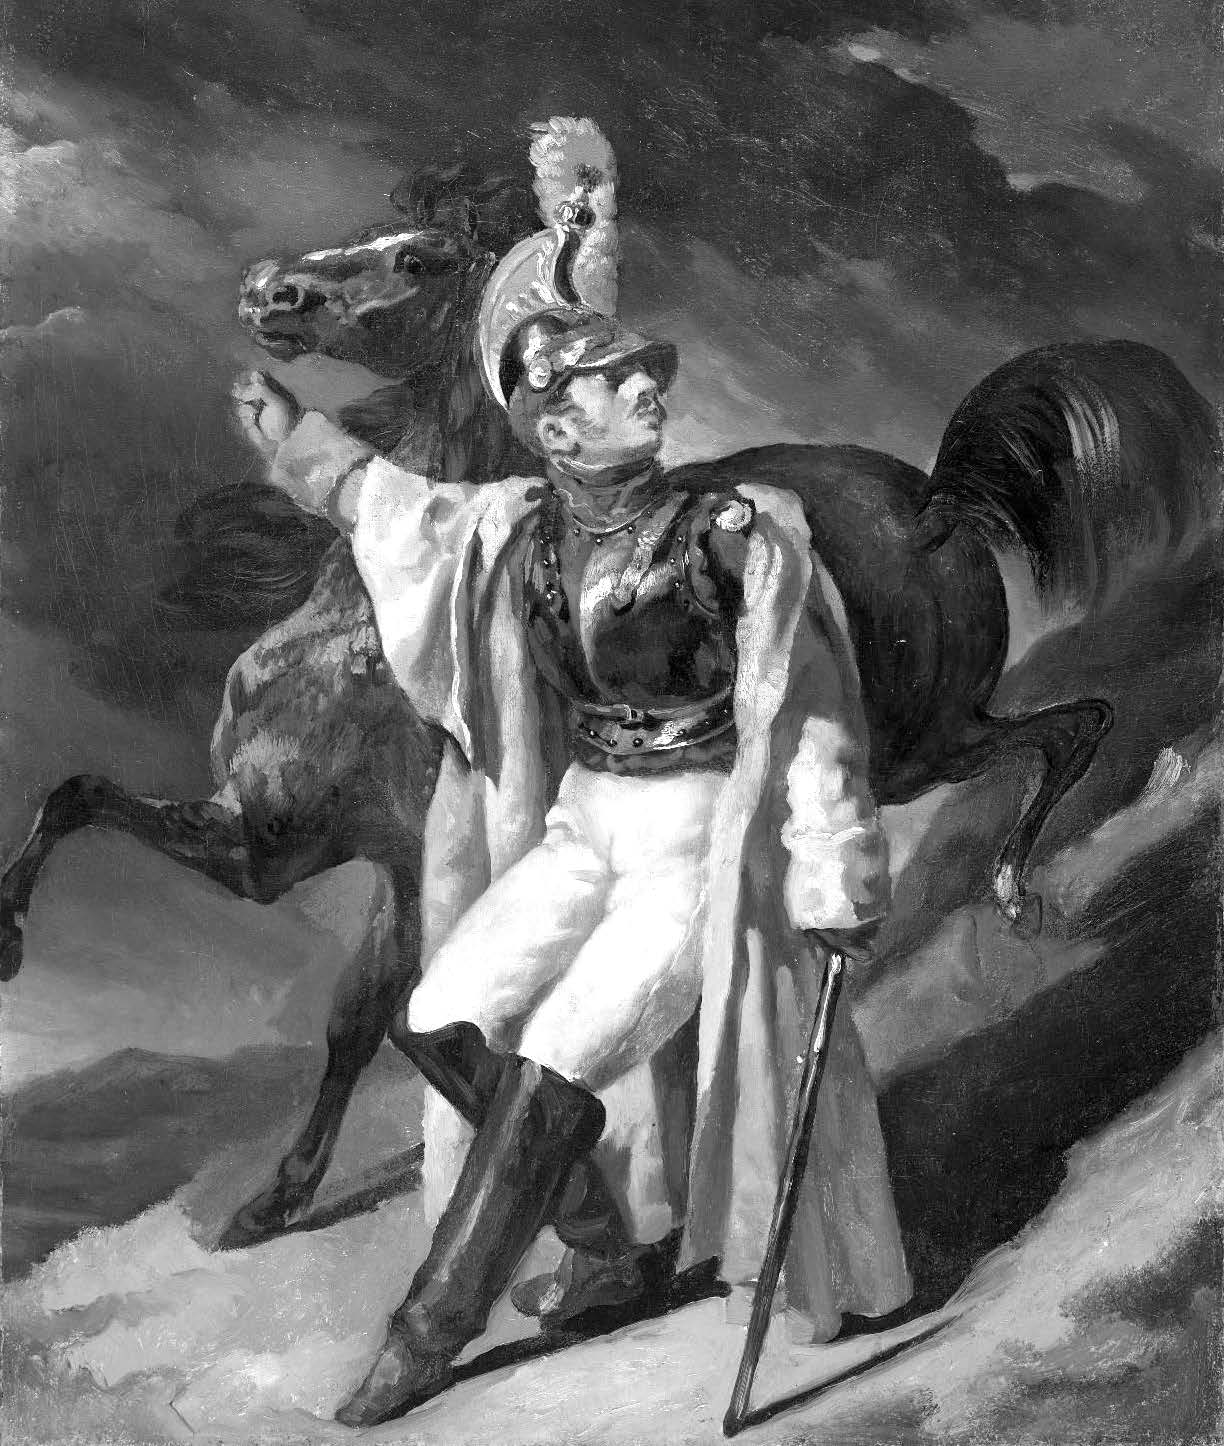 The Wounded Cuirassier, by Théodore Géricault, study (ca. 1814).